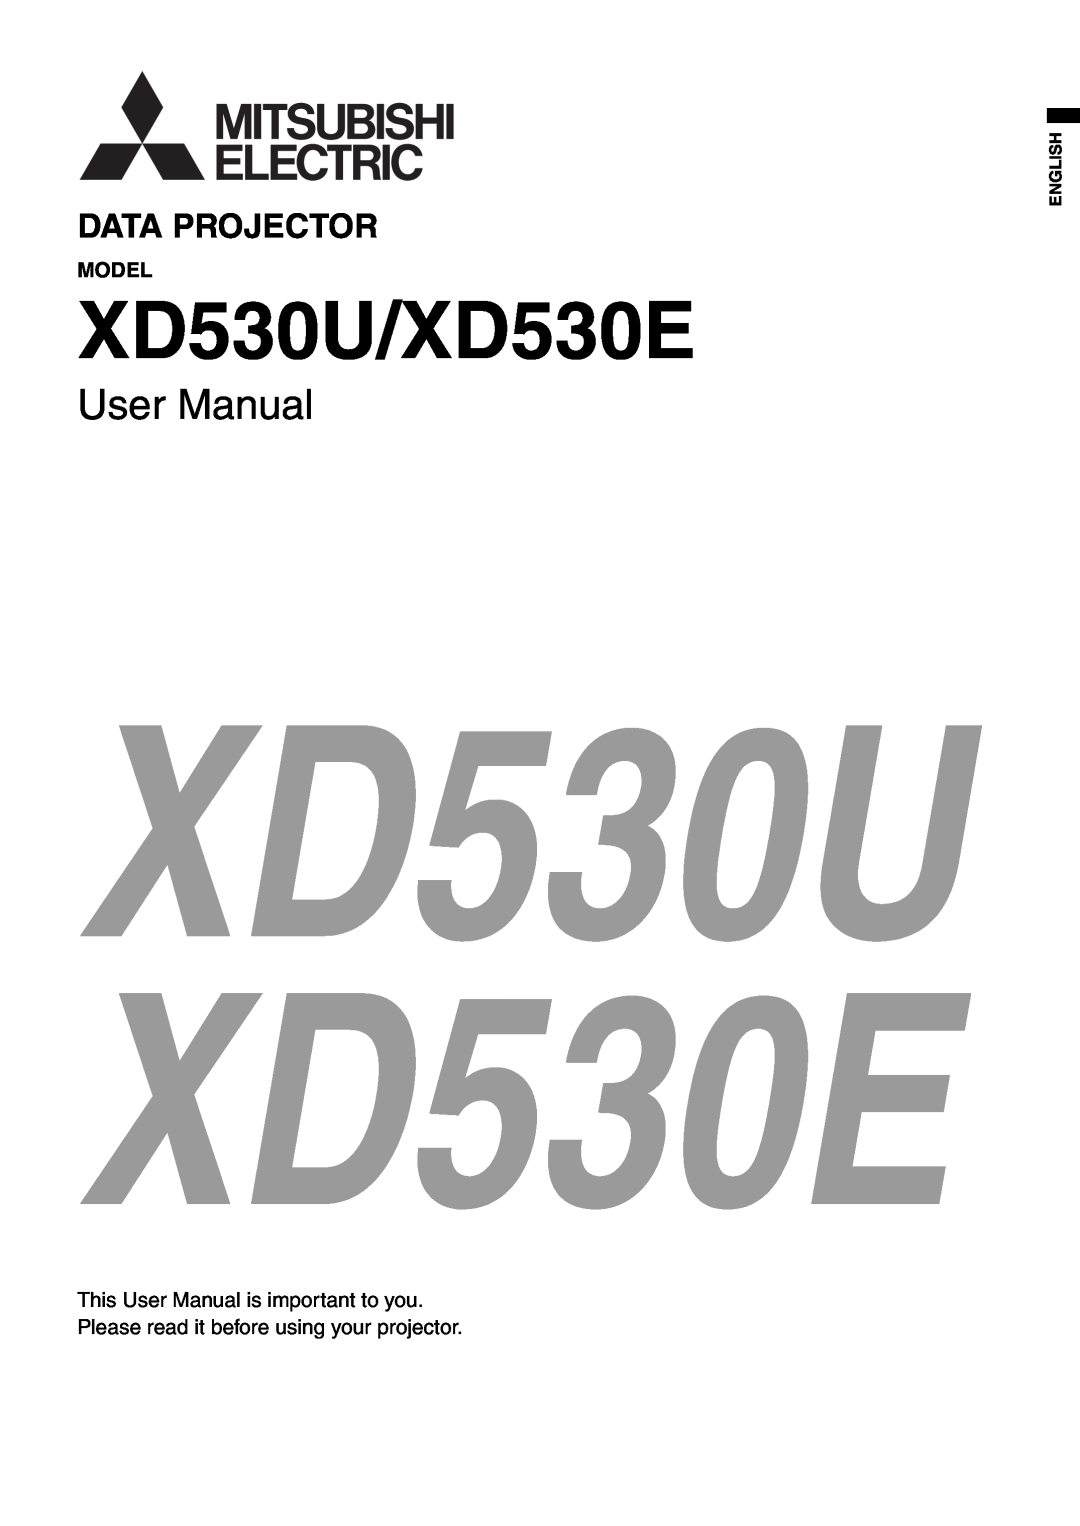 Mitsubishi Electronics user manual Model, This User Manual is important to you, English, XD530U/XD530E, Data Projector 